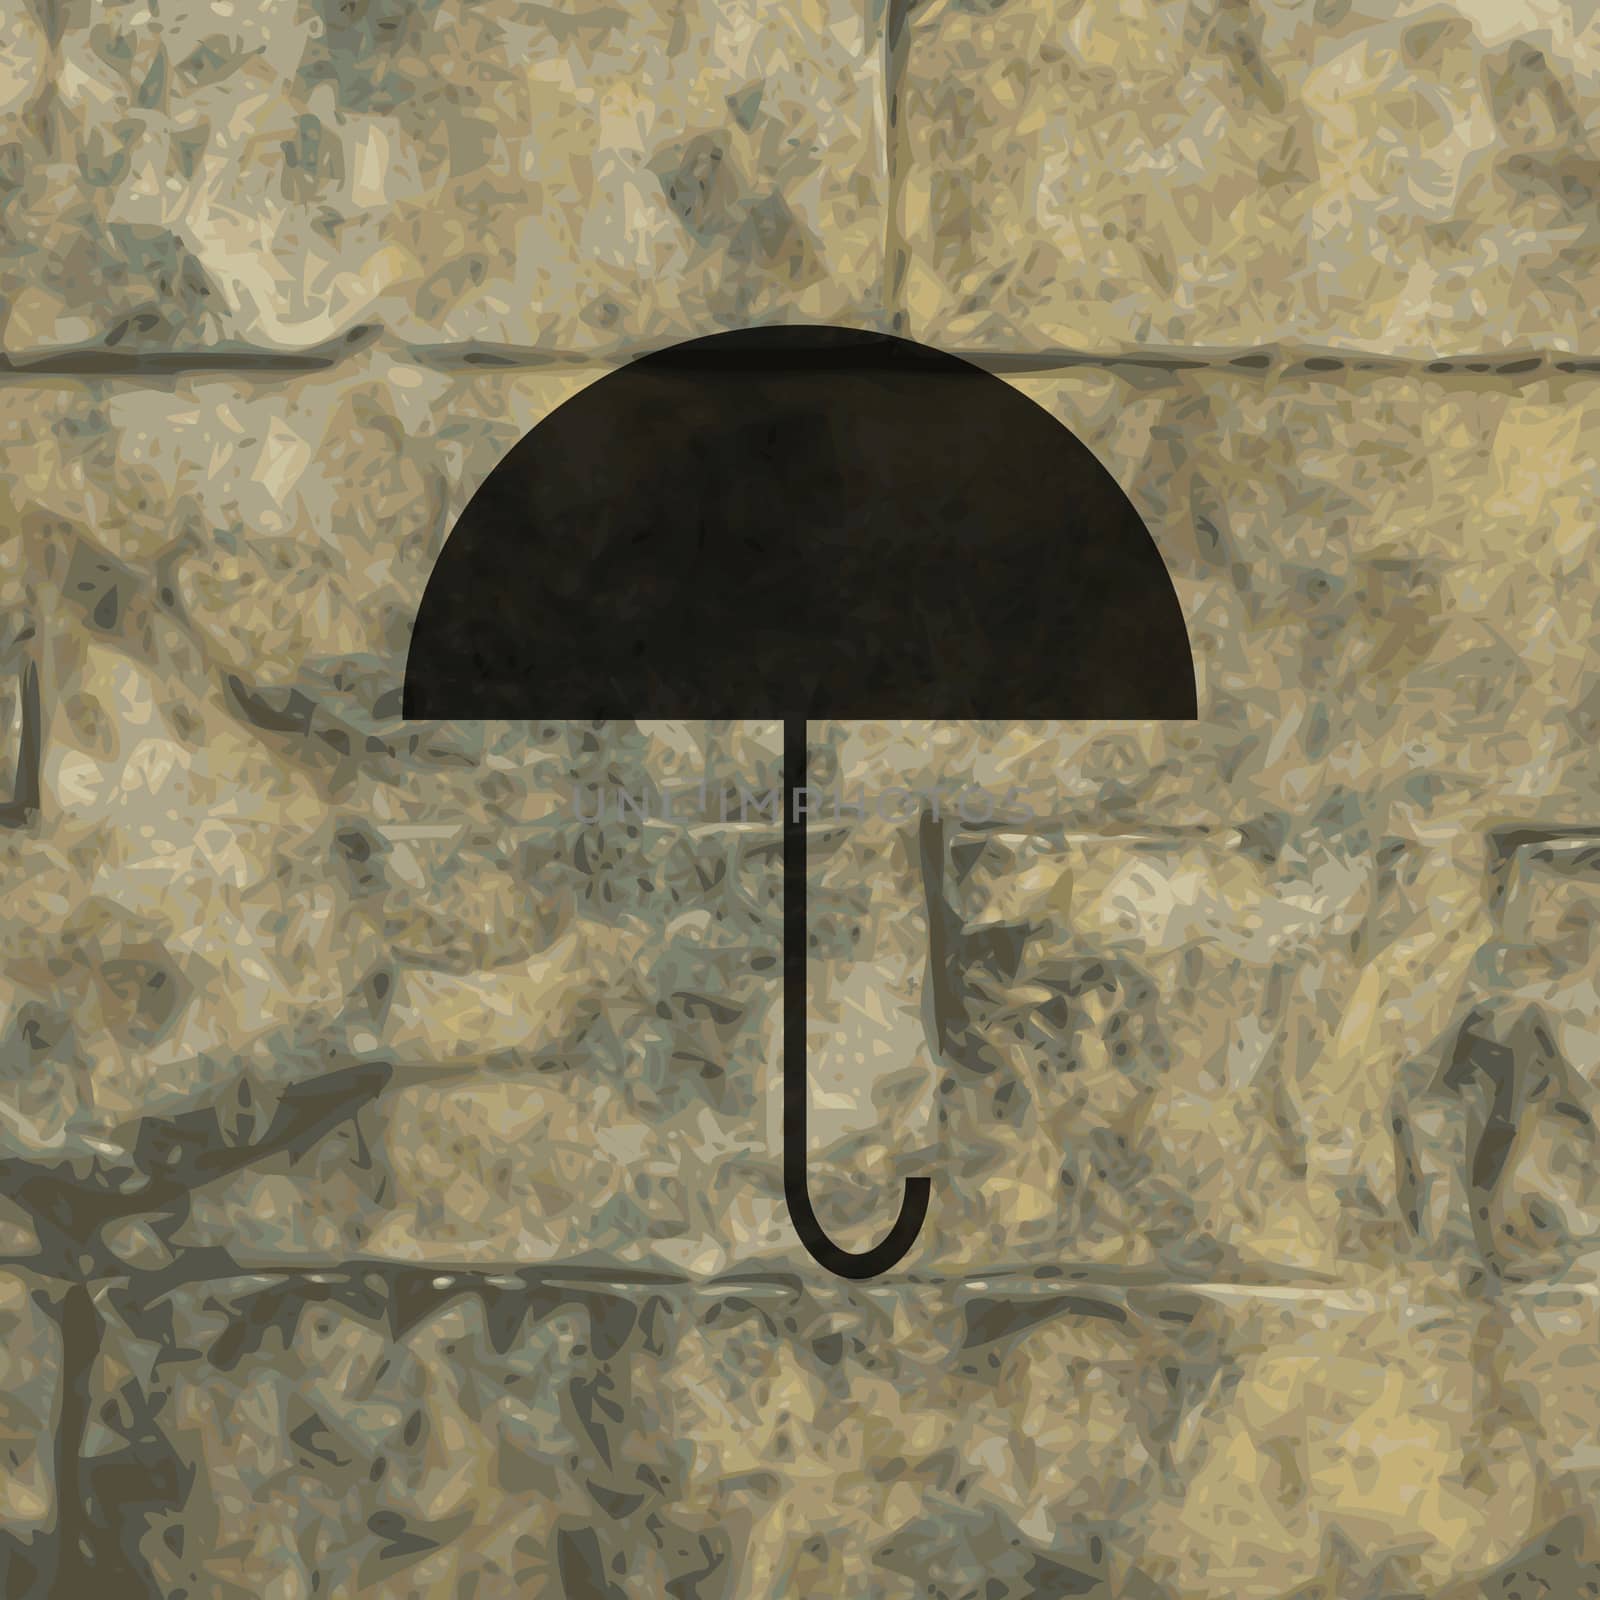 Umbrella icon Flat with abstract background by serhii_lohvyniuk